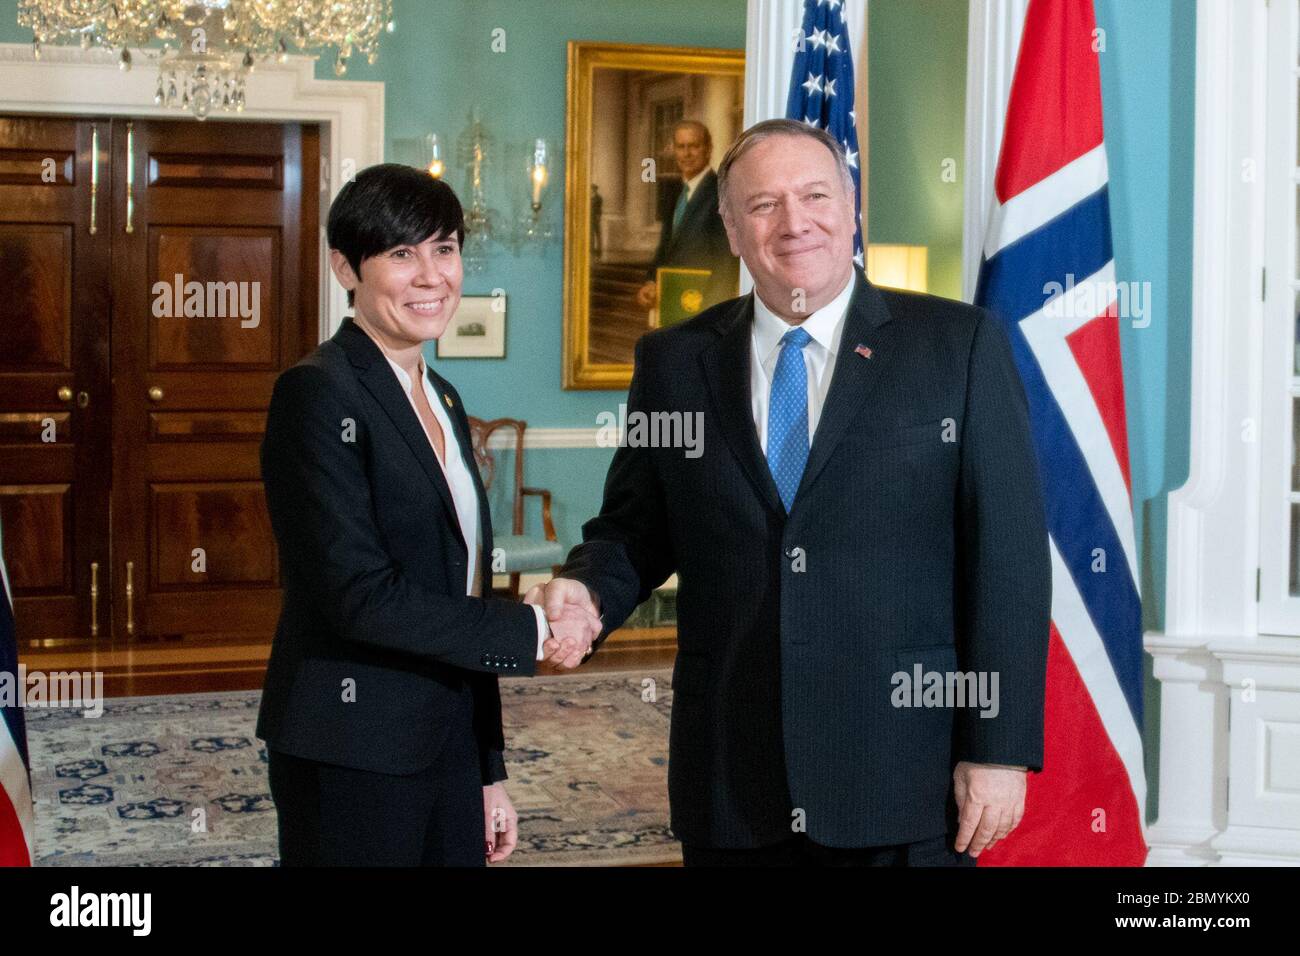 Secretary Pompeo Meets with Norwegian Foreign Minister Søreide Secretary of State Michael R. Pompeo meets with Norwegian Foreign Minister Ine Marie Eriksen Søreide at the U.S. Department of State in Washington, D.C., on November 12, 2019. Stock Photo